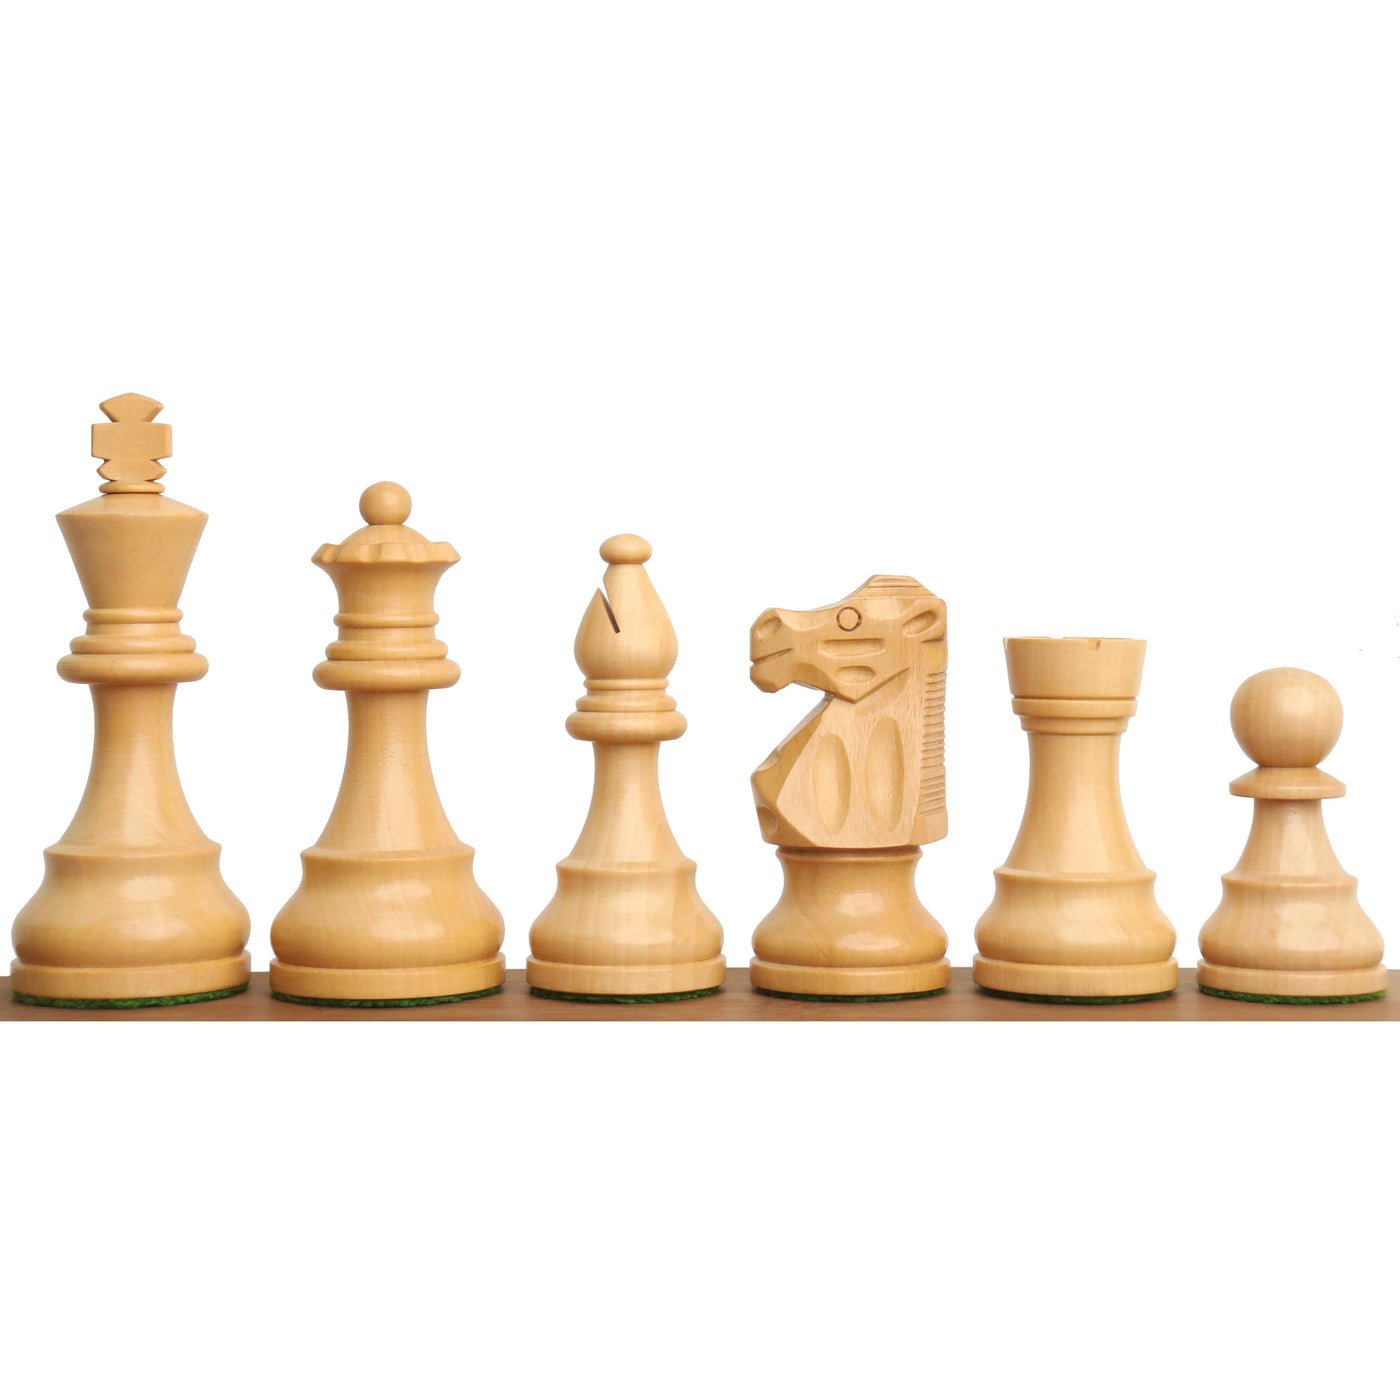 Reproduced French Lardy Staunton Chess Pieces set - Weighted Wood - 4 Queens